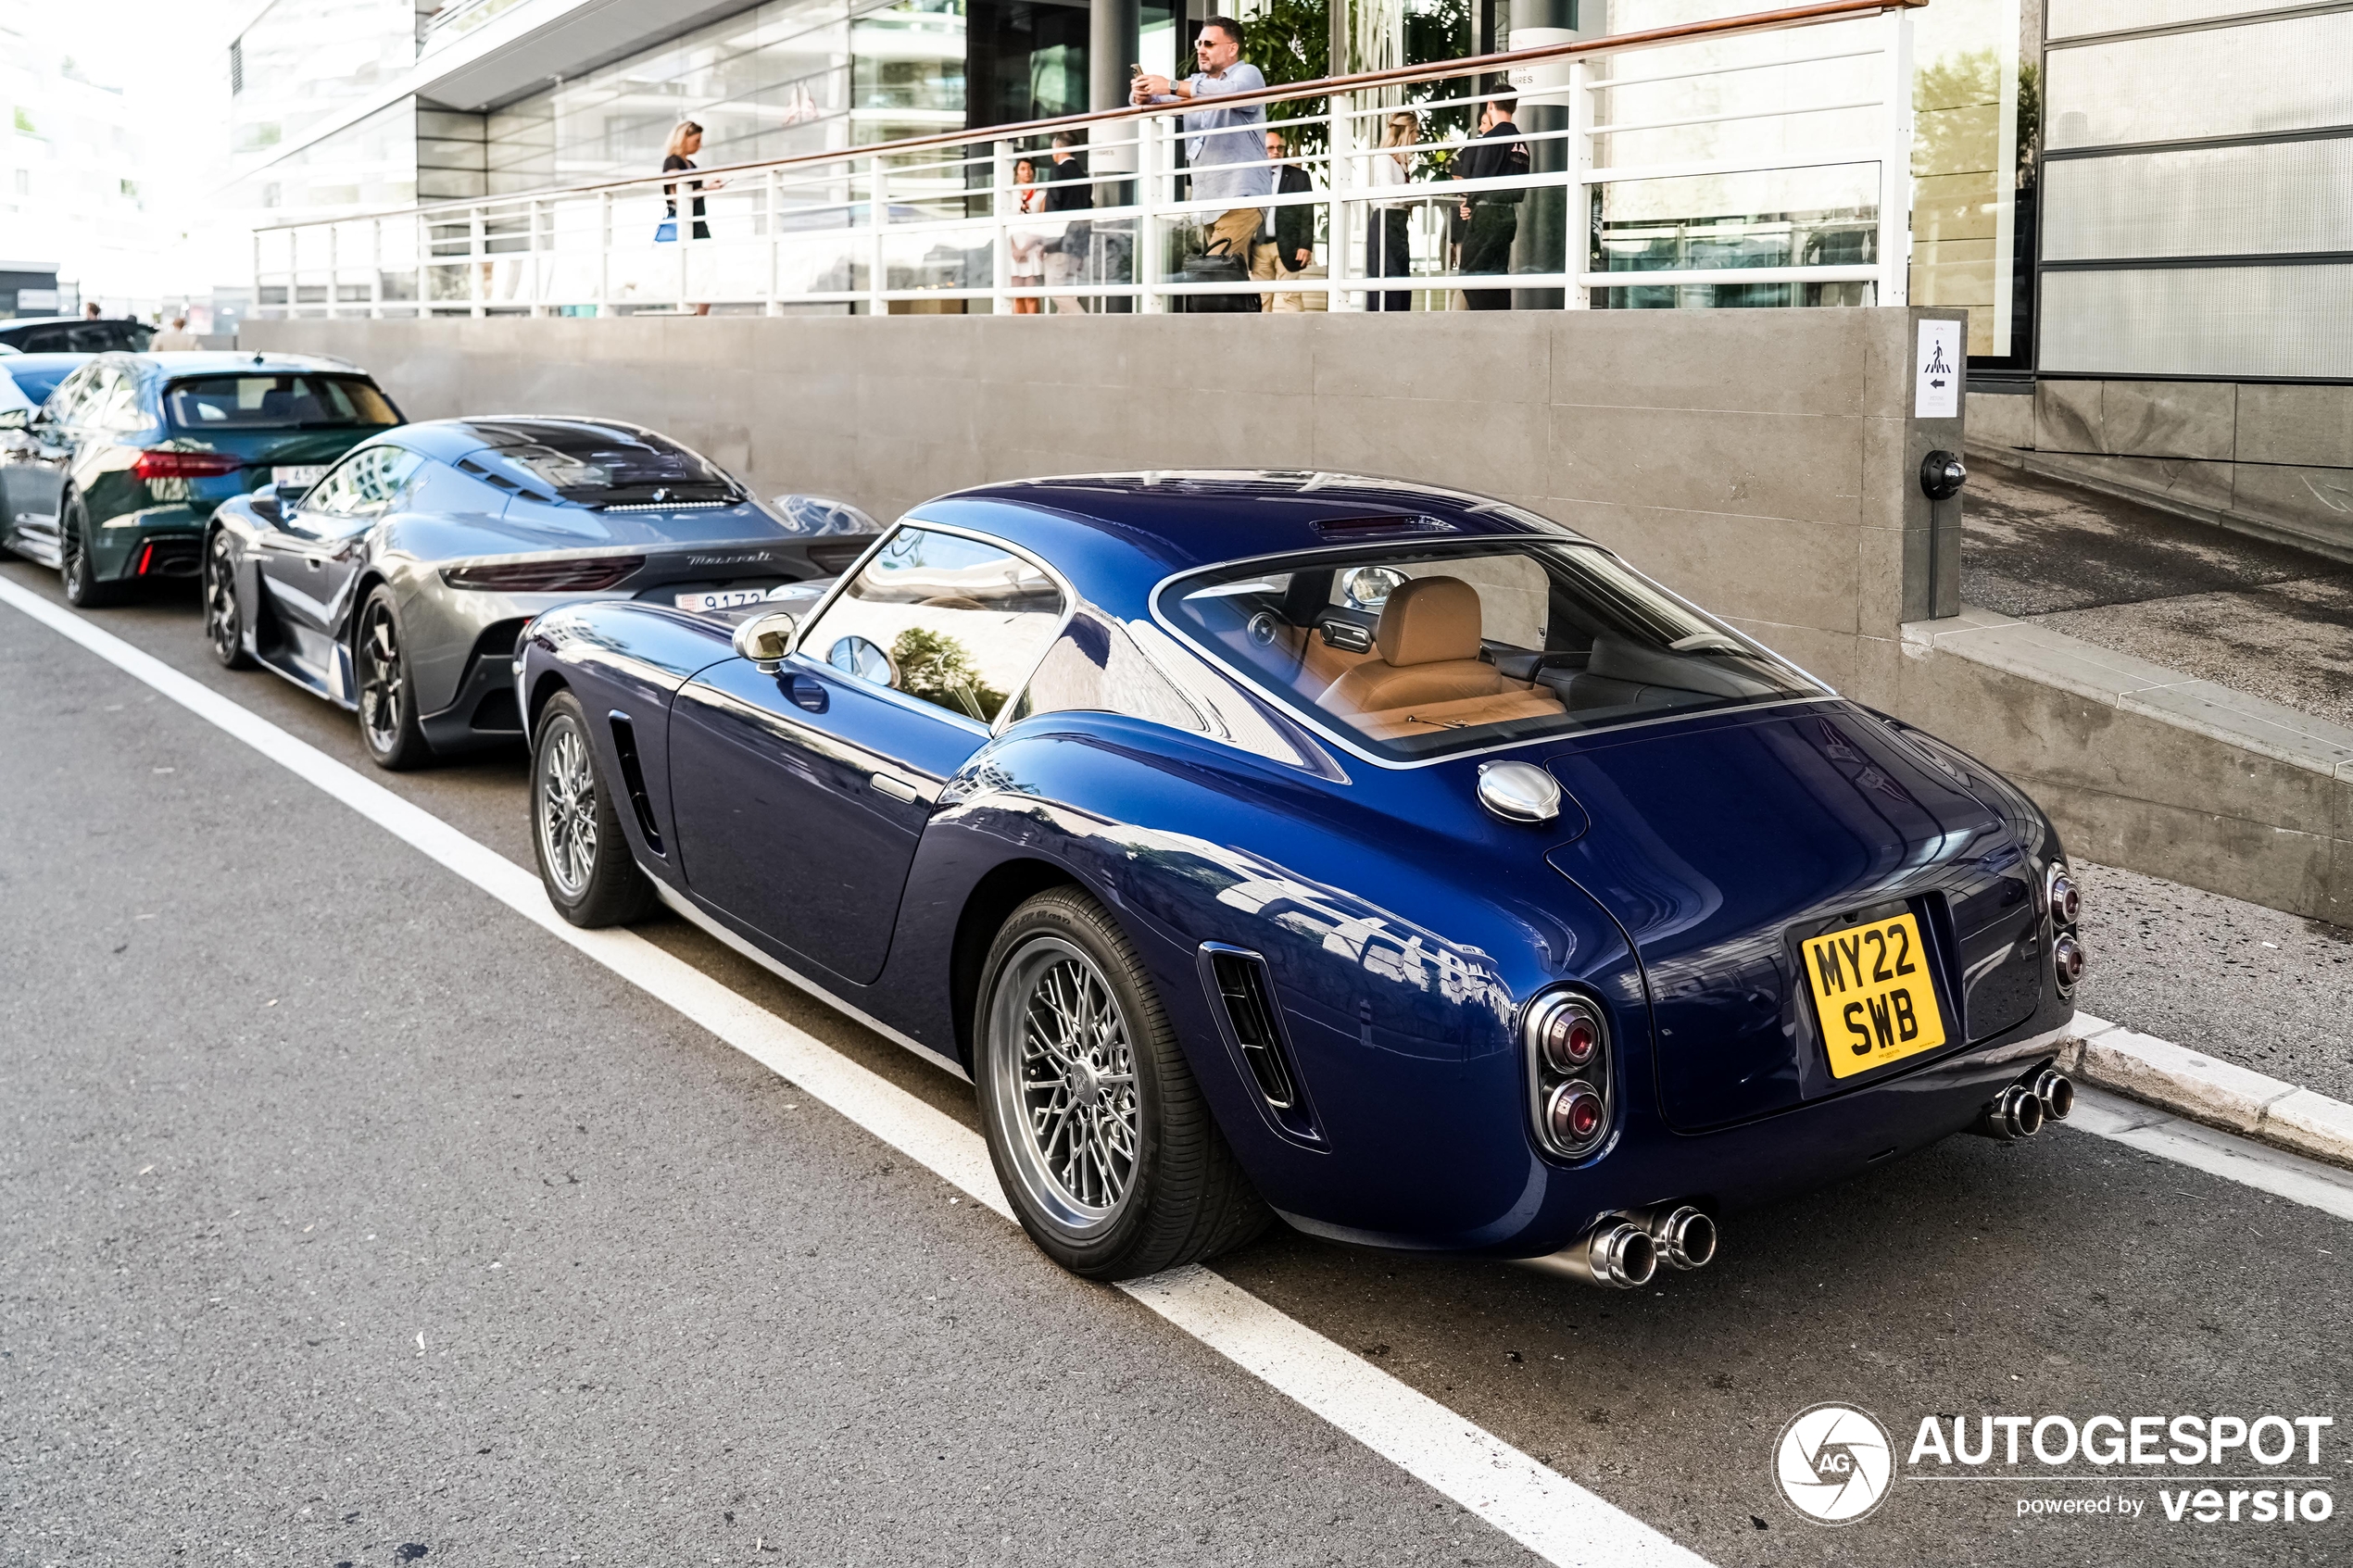 A new Restomod car shows up in Monaco